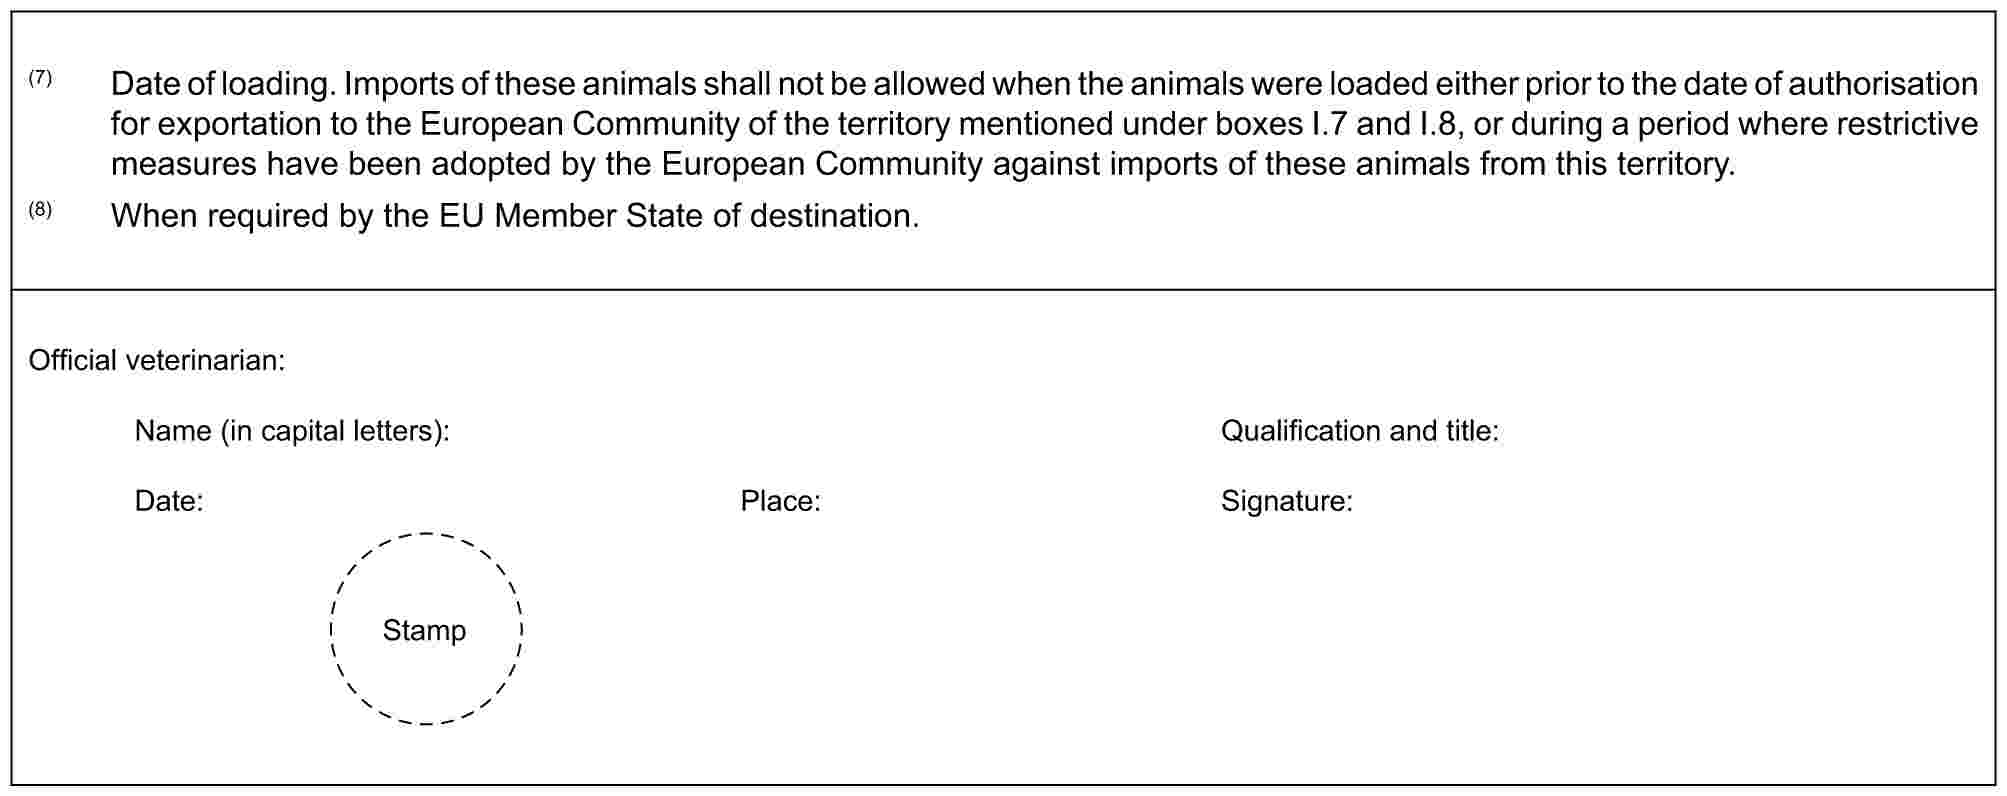 (7) Date of loading. Imports of these animals shall not be allowed when the animals were loaded either prior to the date of authorisation for exportation to the European Community of the territory mentioned under boxes I.7 and I.8, or during a period where restrictive measures have been adopted by the European Community against imports of these animals from this territory.(8) When required by the EU Member State of destination.Official veterinarian:Name (in capital letters):Qualification and title:Date:Place:Signature: